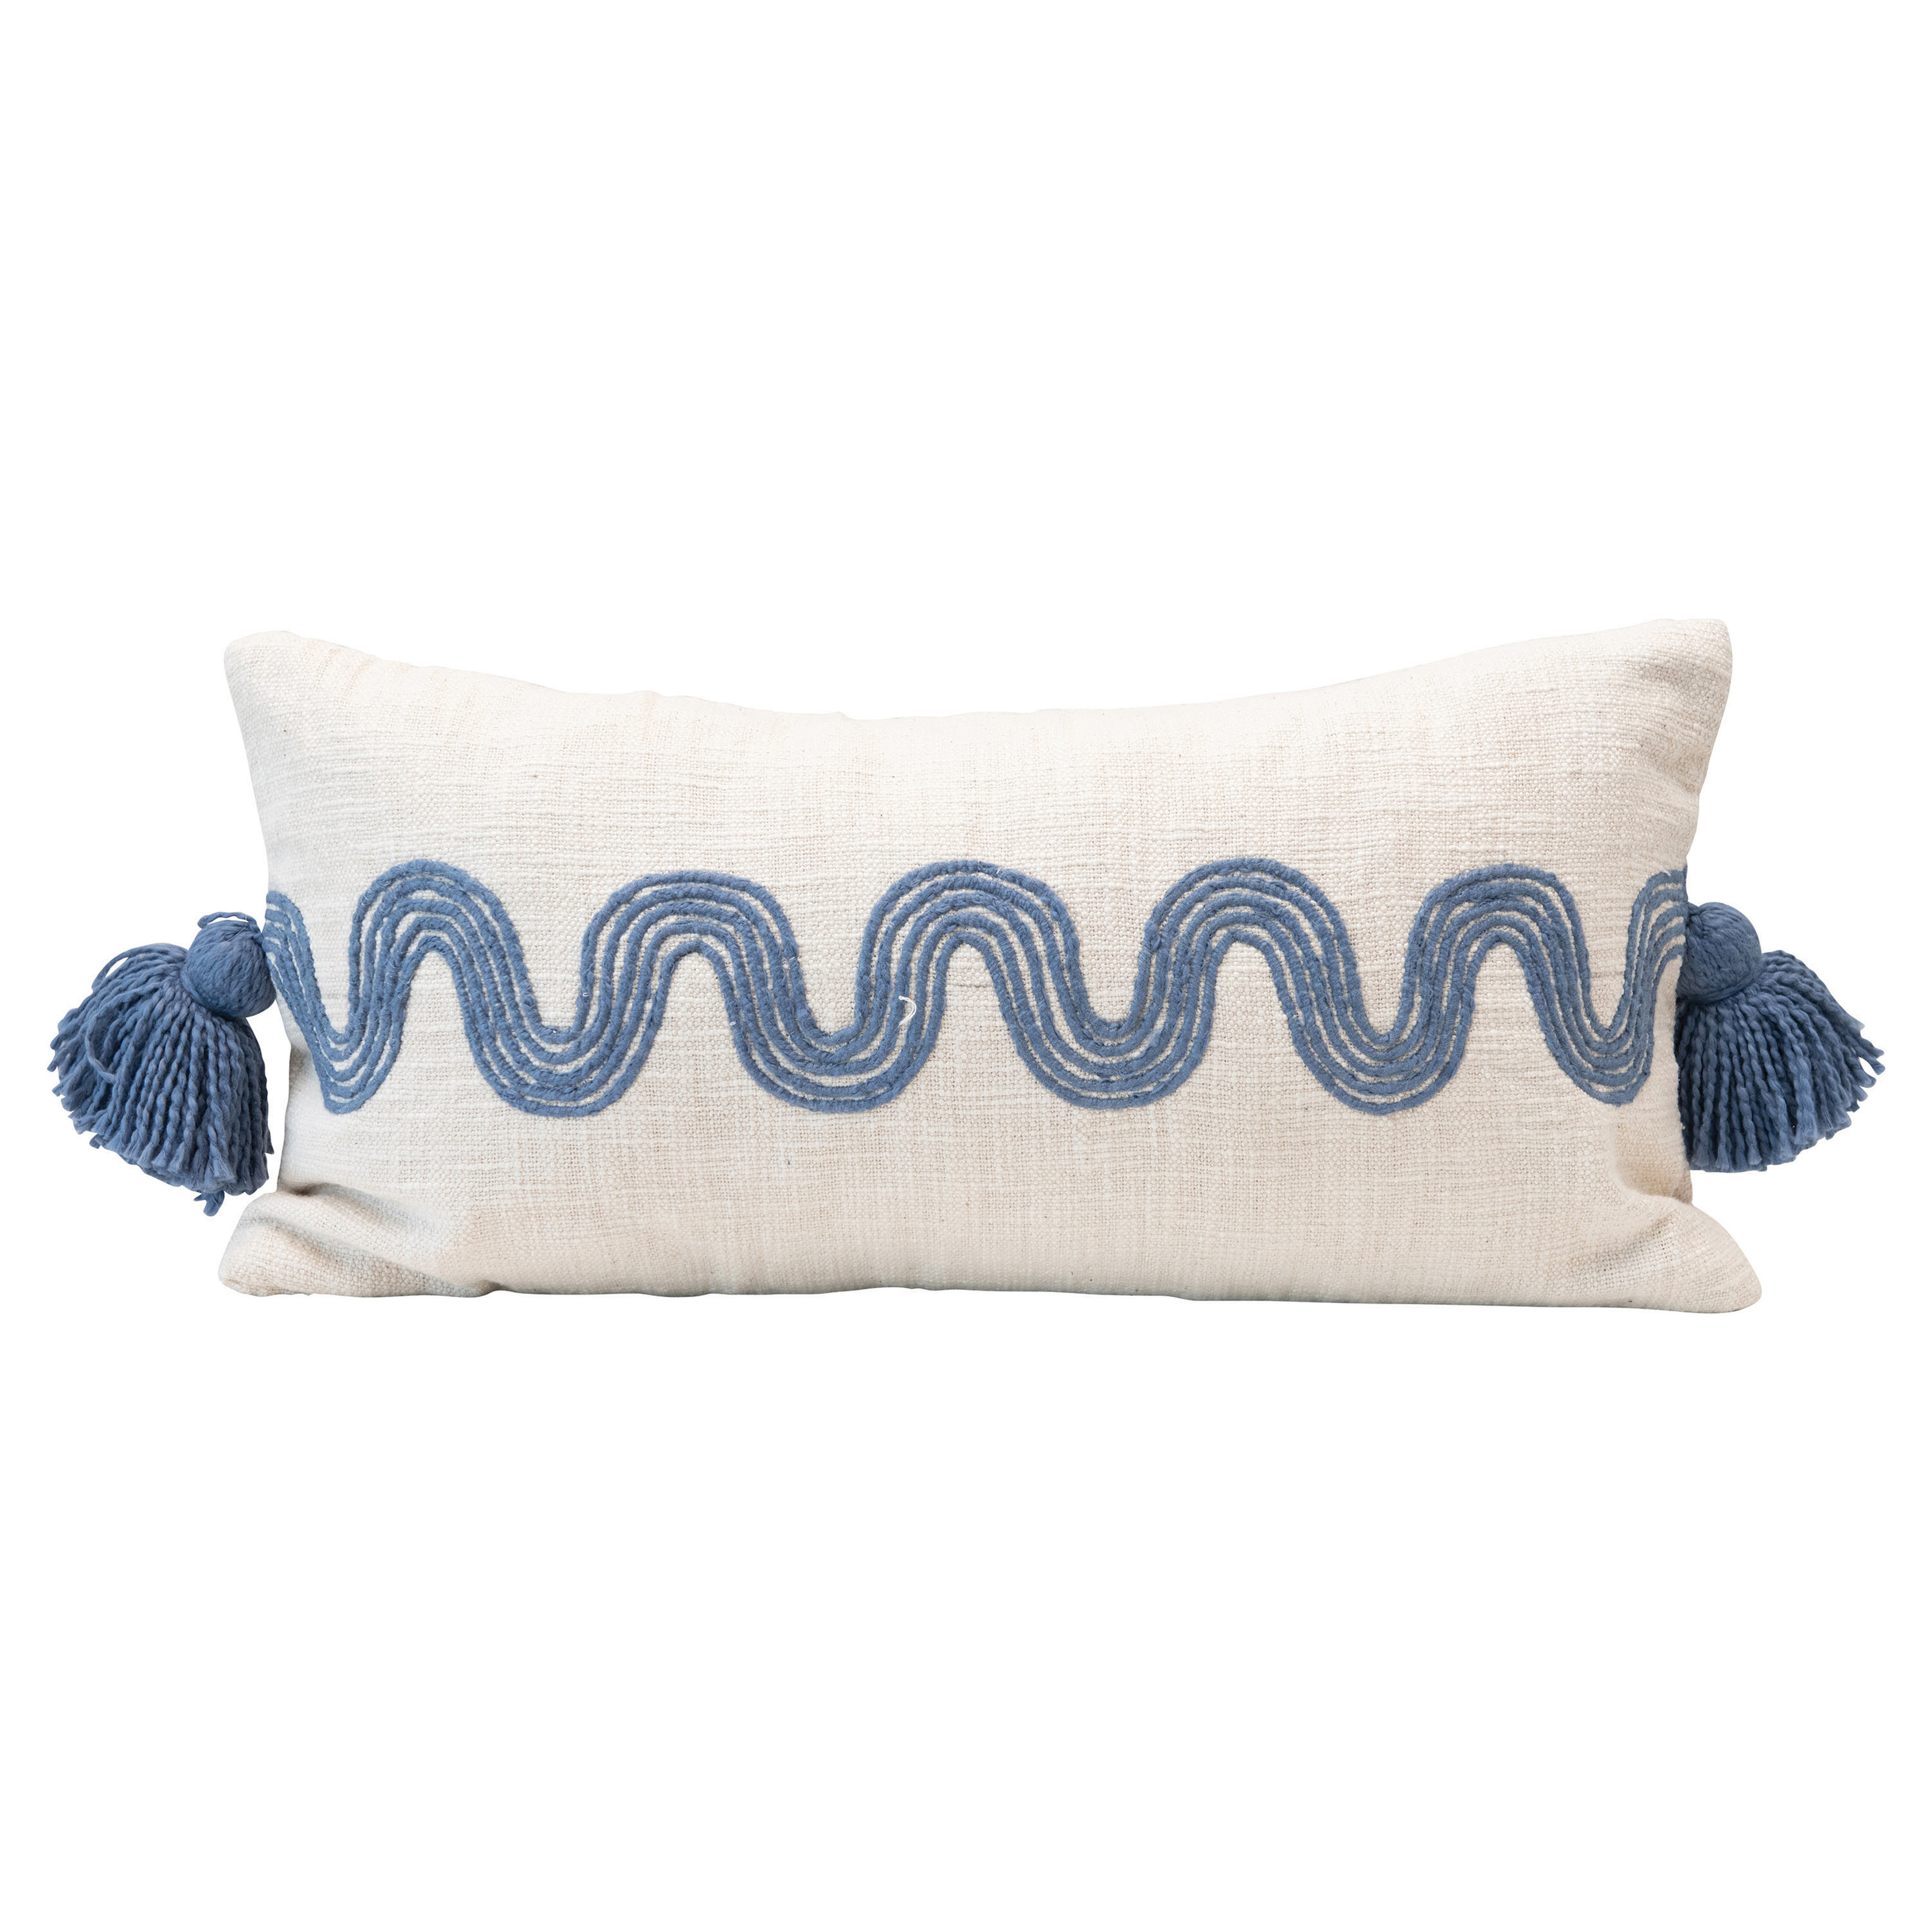 Cotton Lumbar Pillow with Embroidered Curved Pattern & Tassels, Cream Color & Blue - Nomad Home